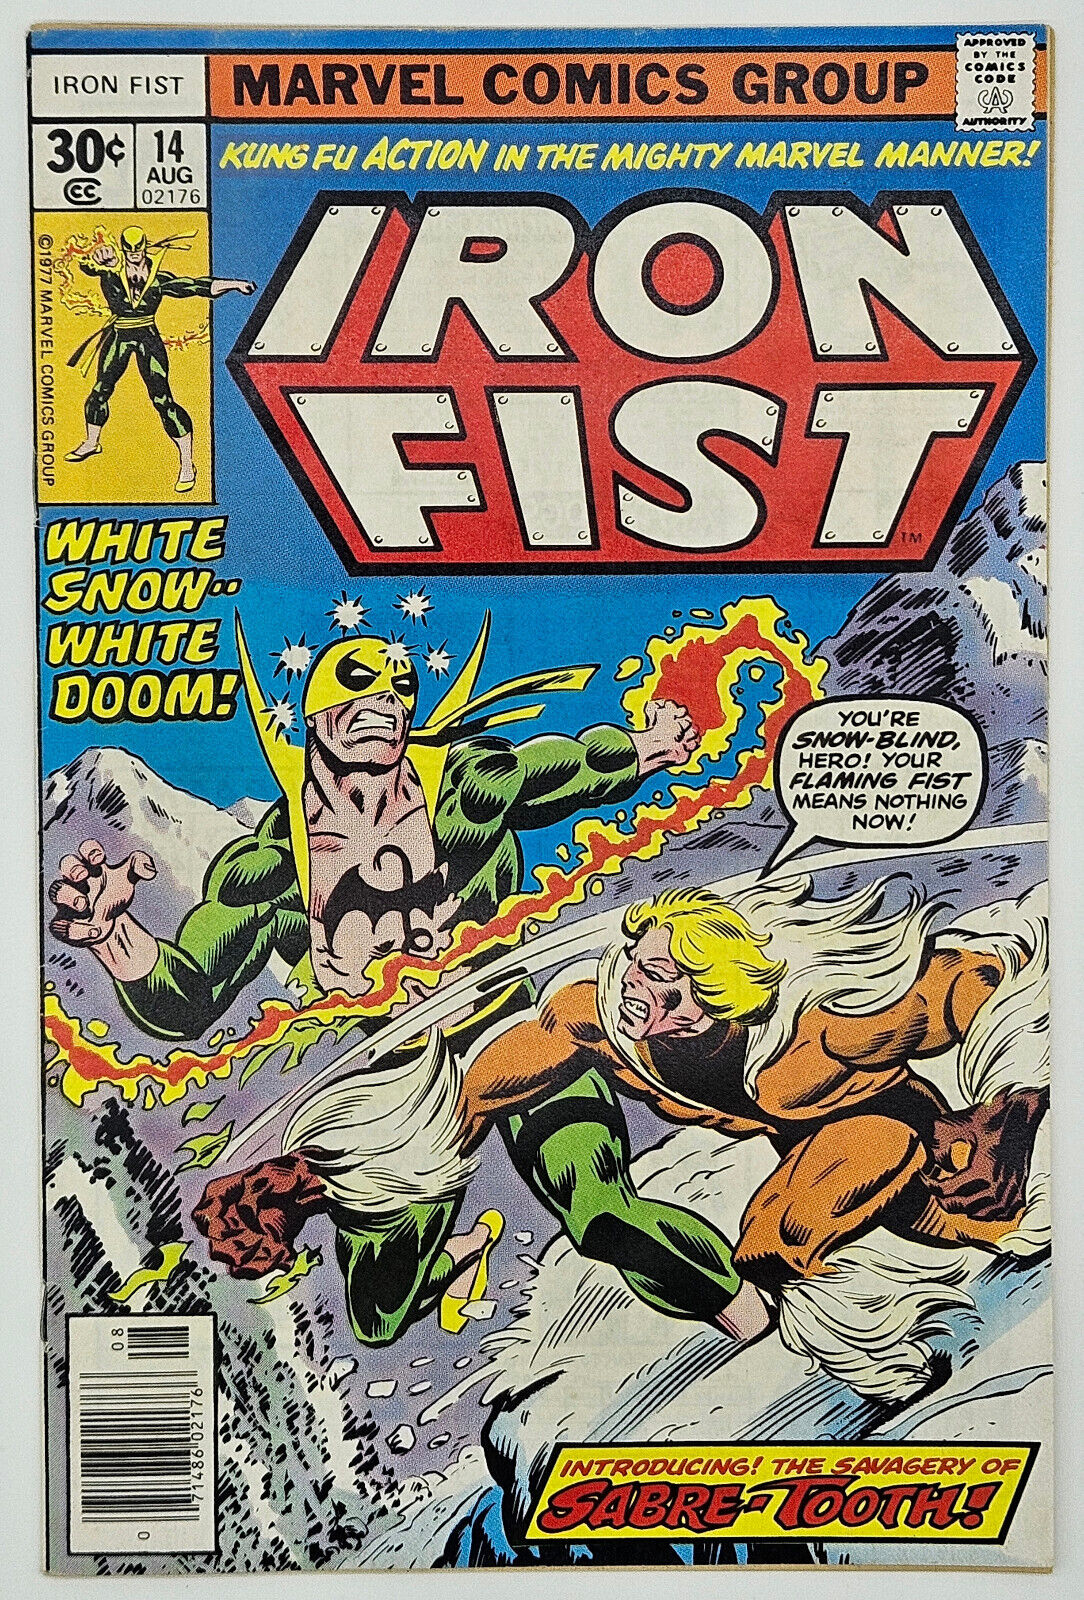 Iron Fist #14 1977 1st Appearance Sabretooth Byrne a.;Stunning High Grade Copy